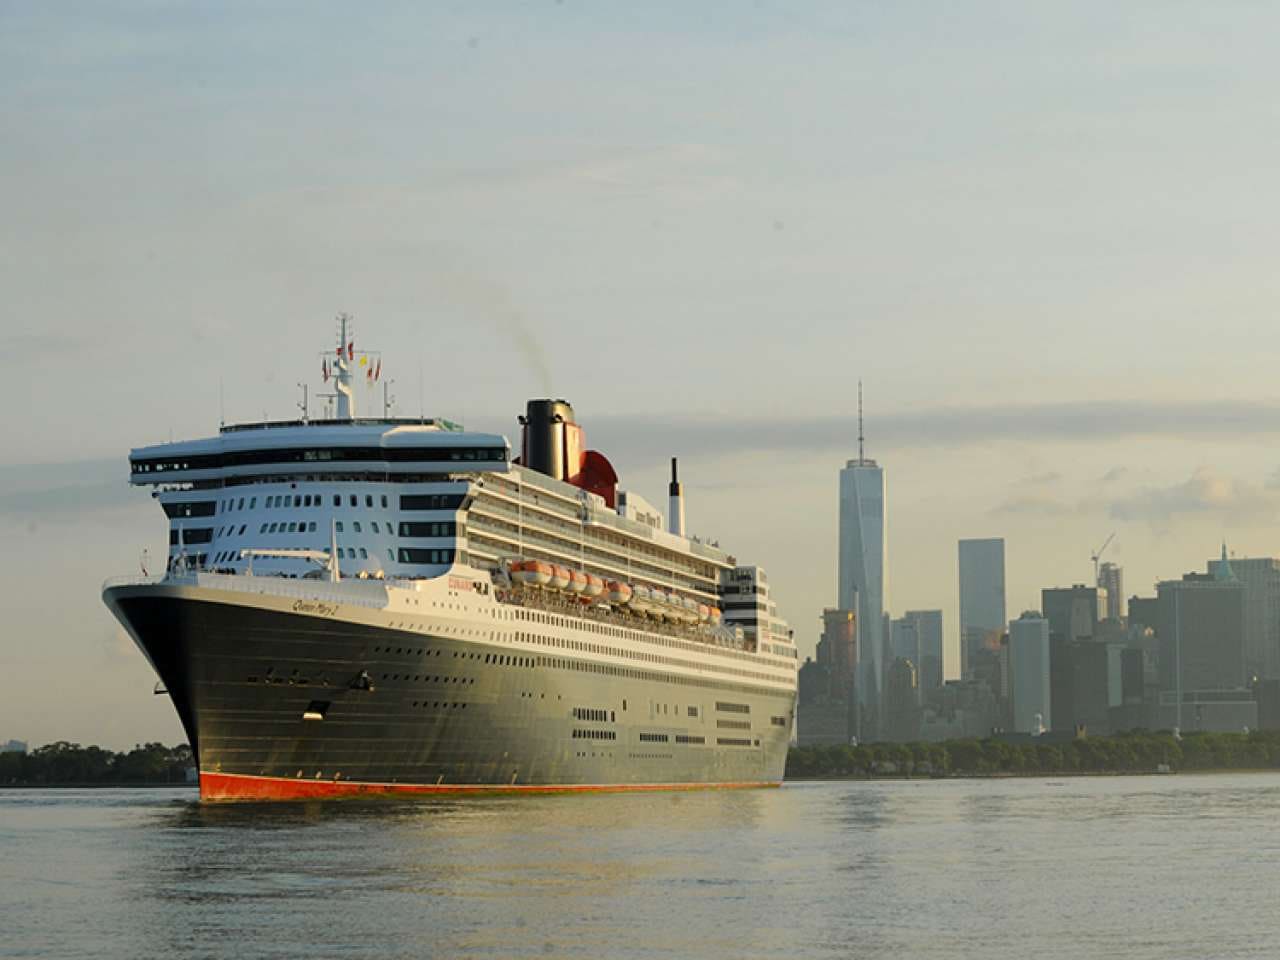 Queen Mary 2 arrives in New York, the final leg of her 175th Anniversary tour, Tuesday, July 14, 2015.  This month marks the 175th Anniversary of Cunard, and the companyÕs flagship, Queen Mary 2, has recreated the historic Transatlantic Crossing from Liverpool to Halifax and Boston made by the RMS Britannia in July 1840.   Although not a port of call in the original crossing made by Britannia, New York has been Cunard's North American home port for over a century.  (Photo by Diane Bondareff/AP Images for Cunard)
